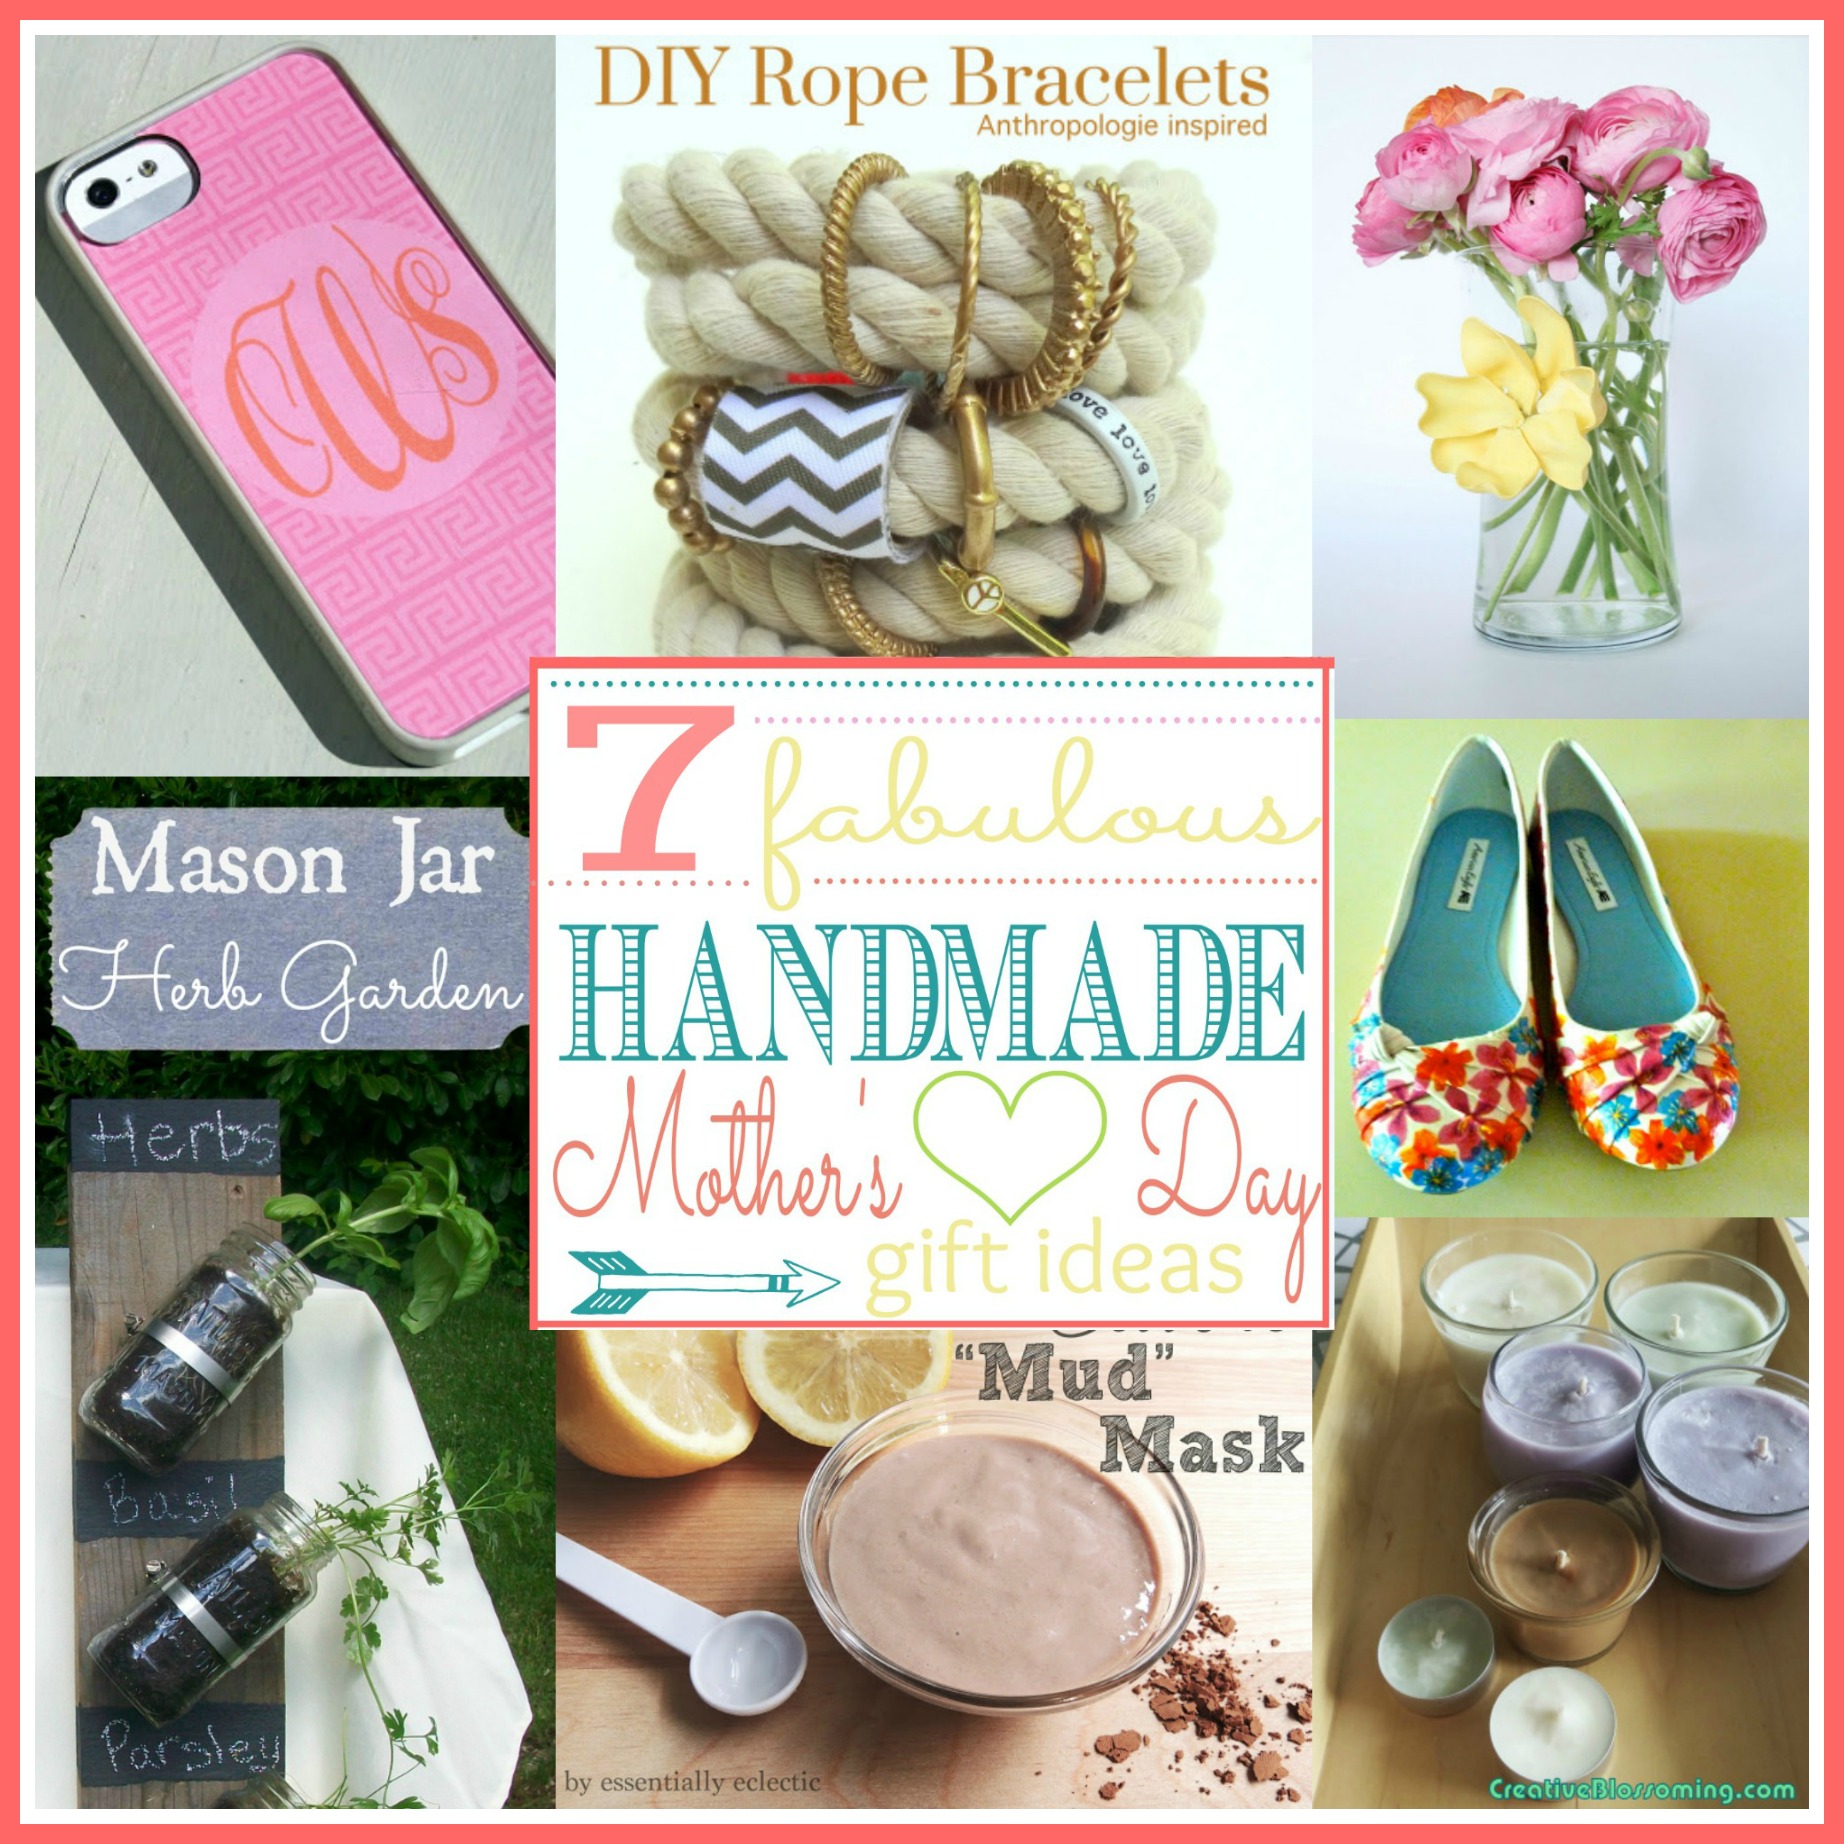 Mother's Day Gift Ideas - First Home Love Life